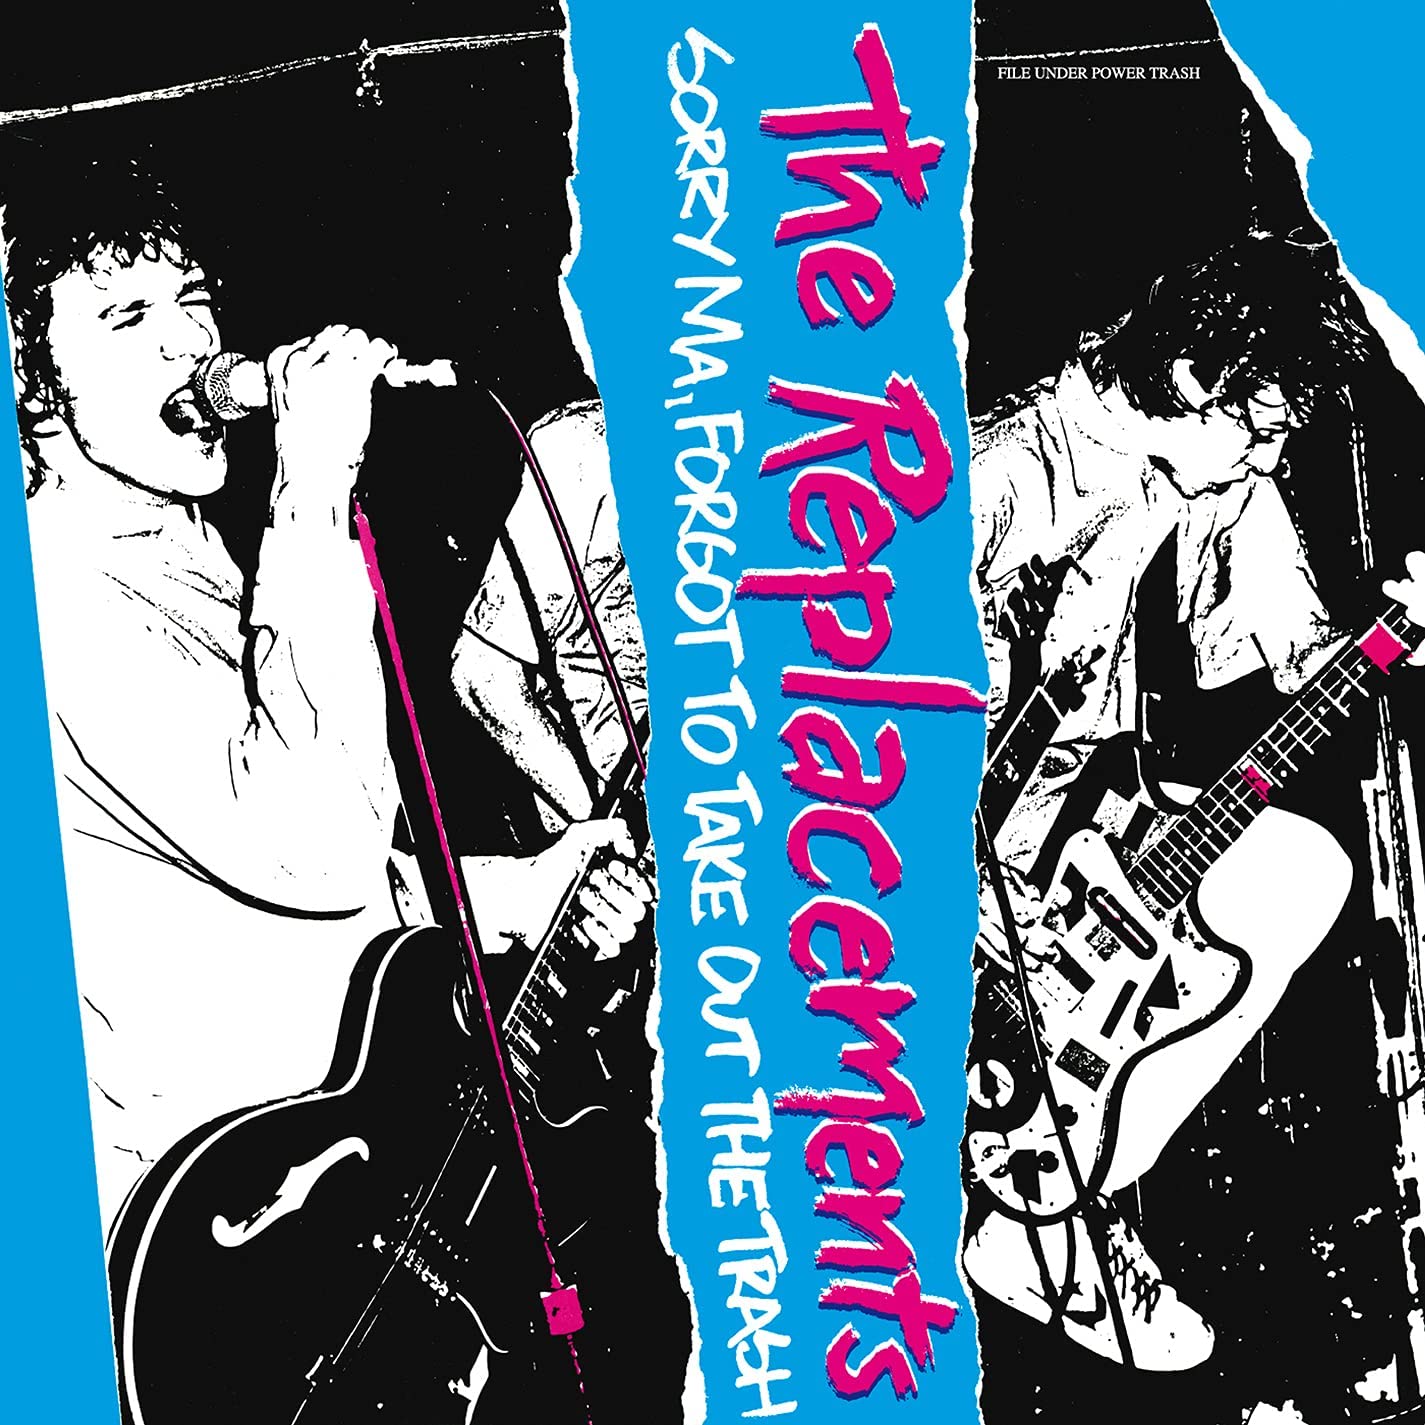 The Replacements - Sorry Ma, Forgot To Take Out The Trash (Deluxe Edition) - 4CD/LP